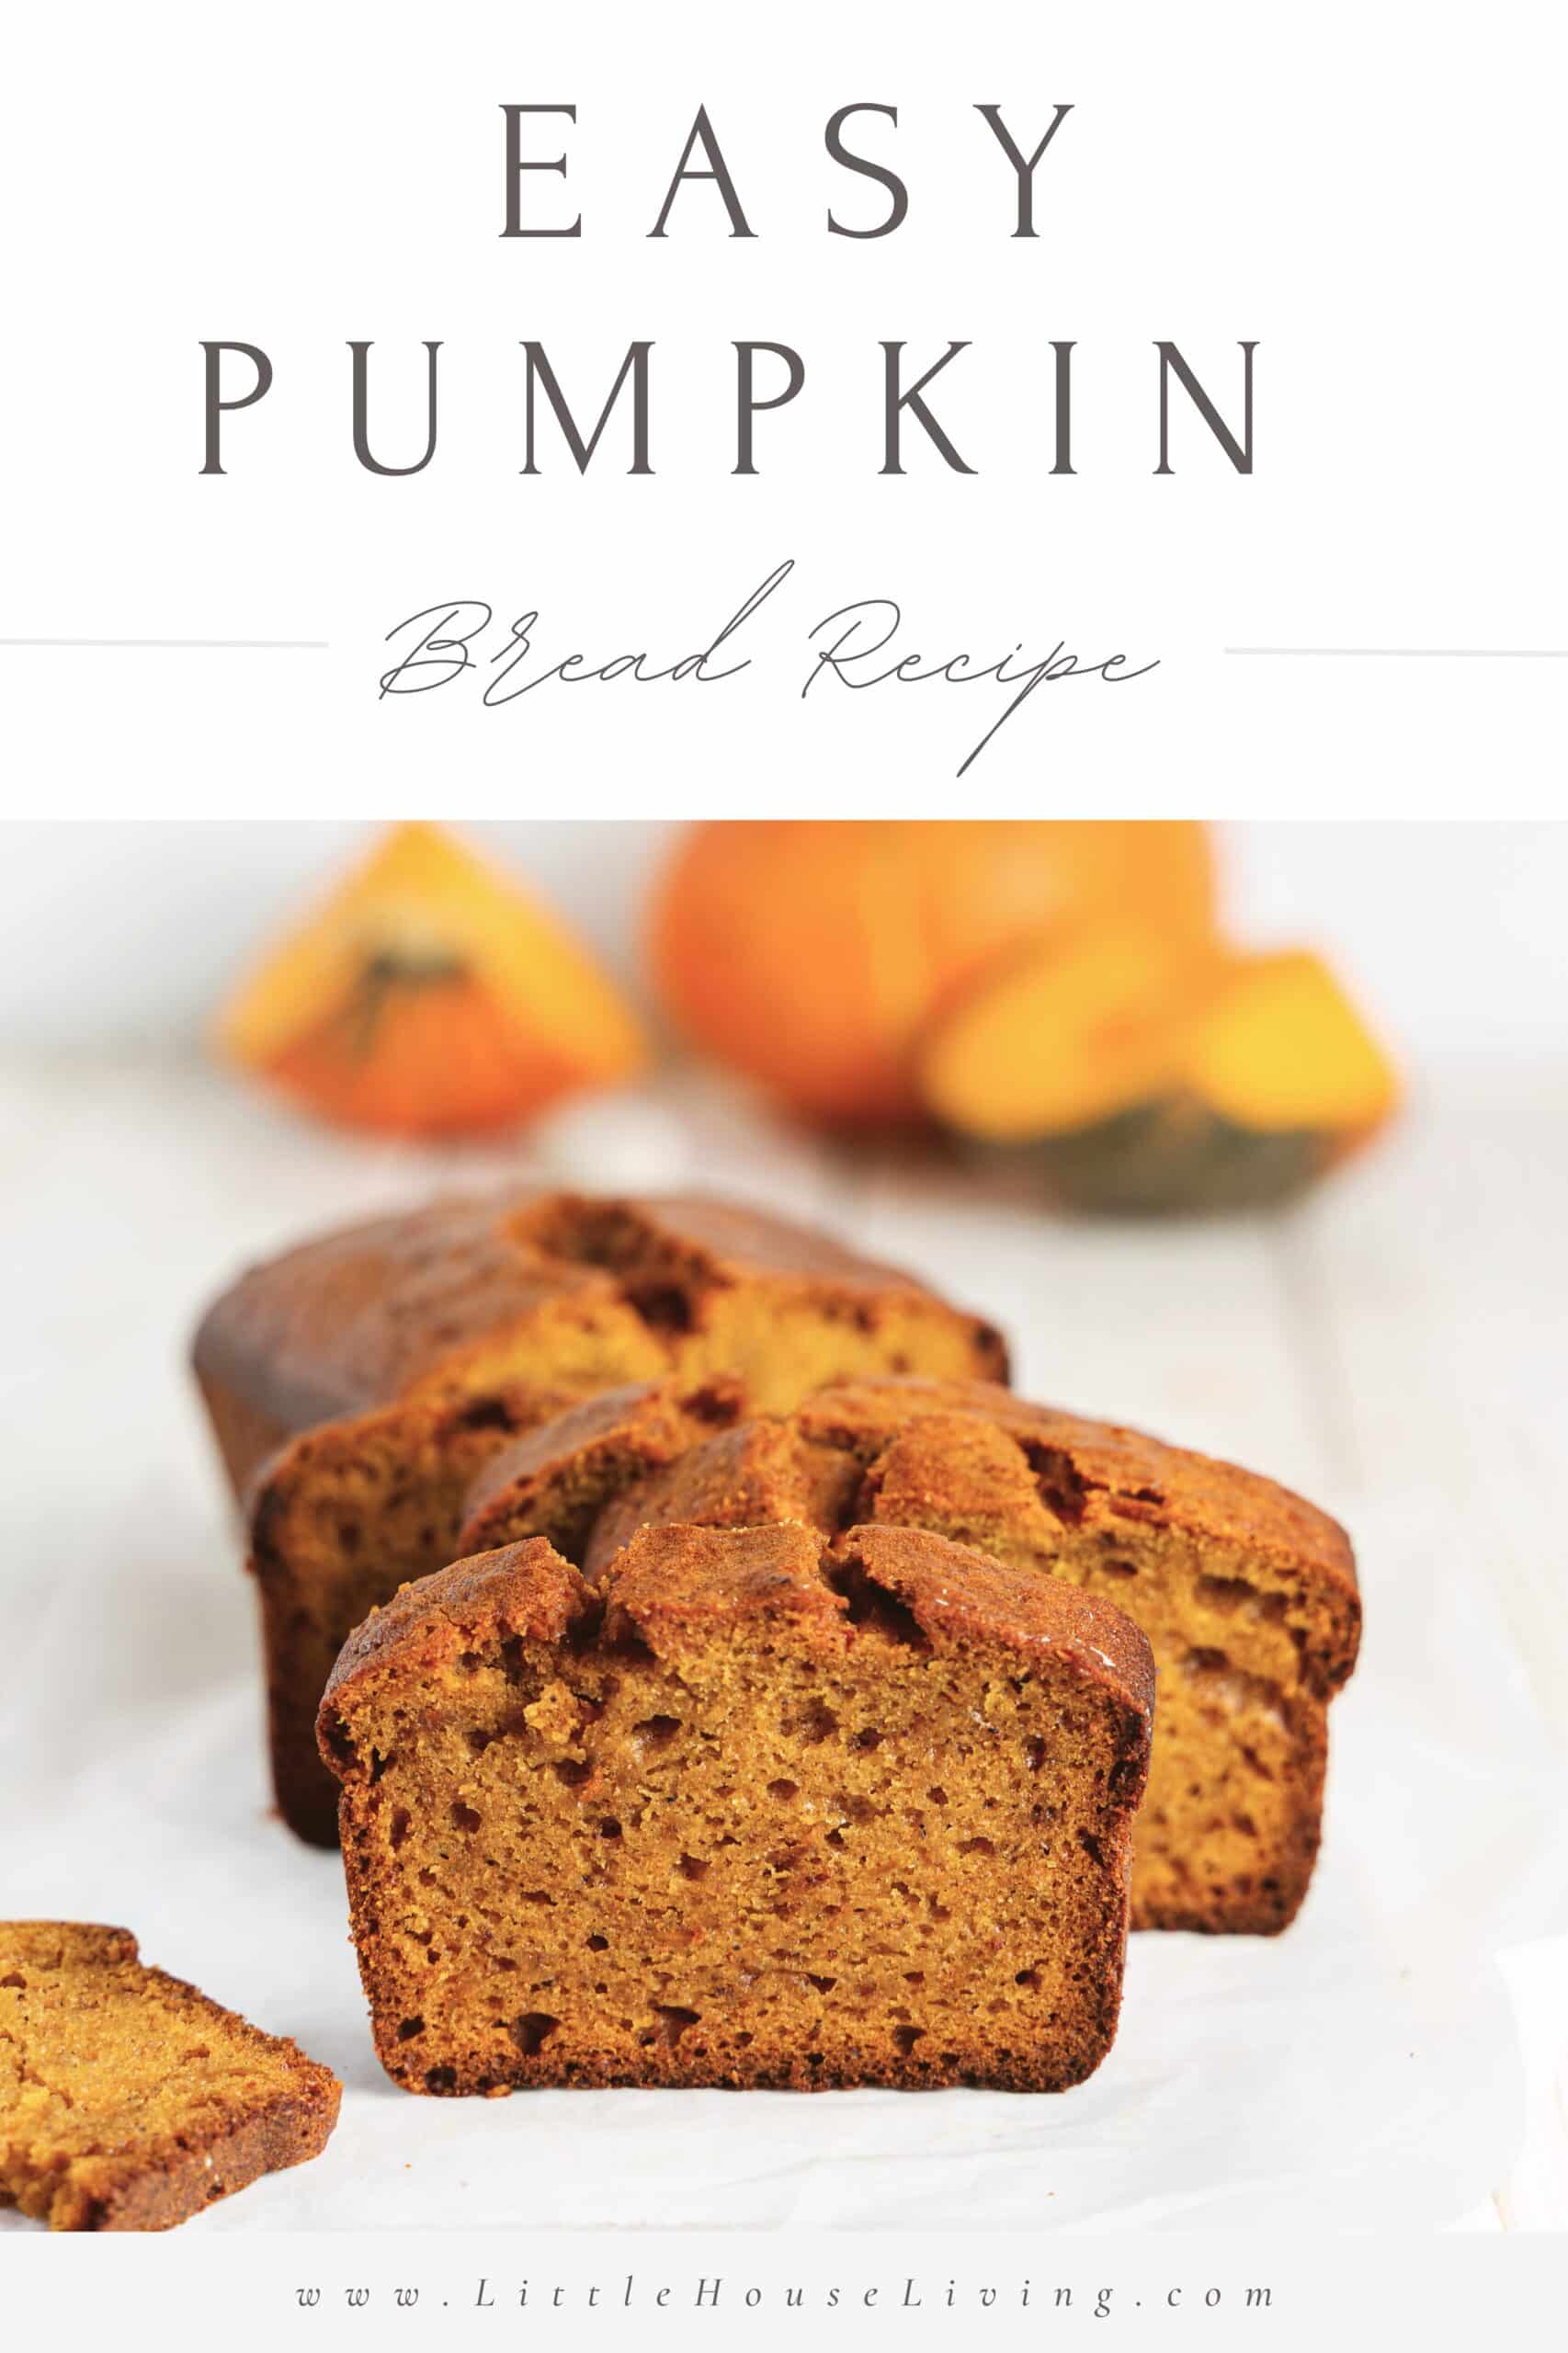 Looking for a deliciously easy and moist Bread recipe to make this fall? This Easy Pumpkin Bread recipe is going to be your new favorite!